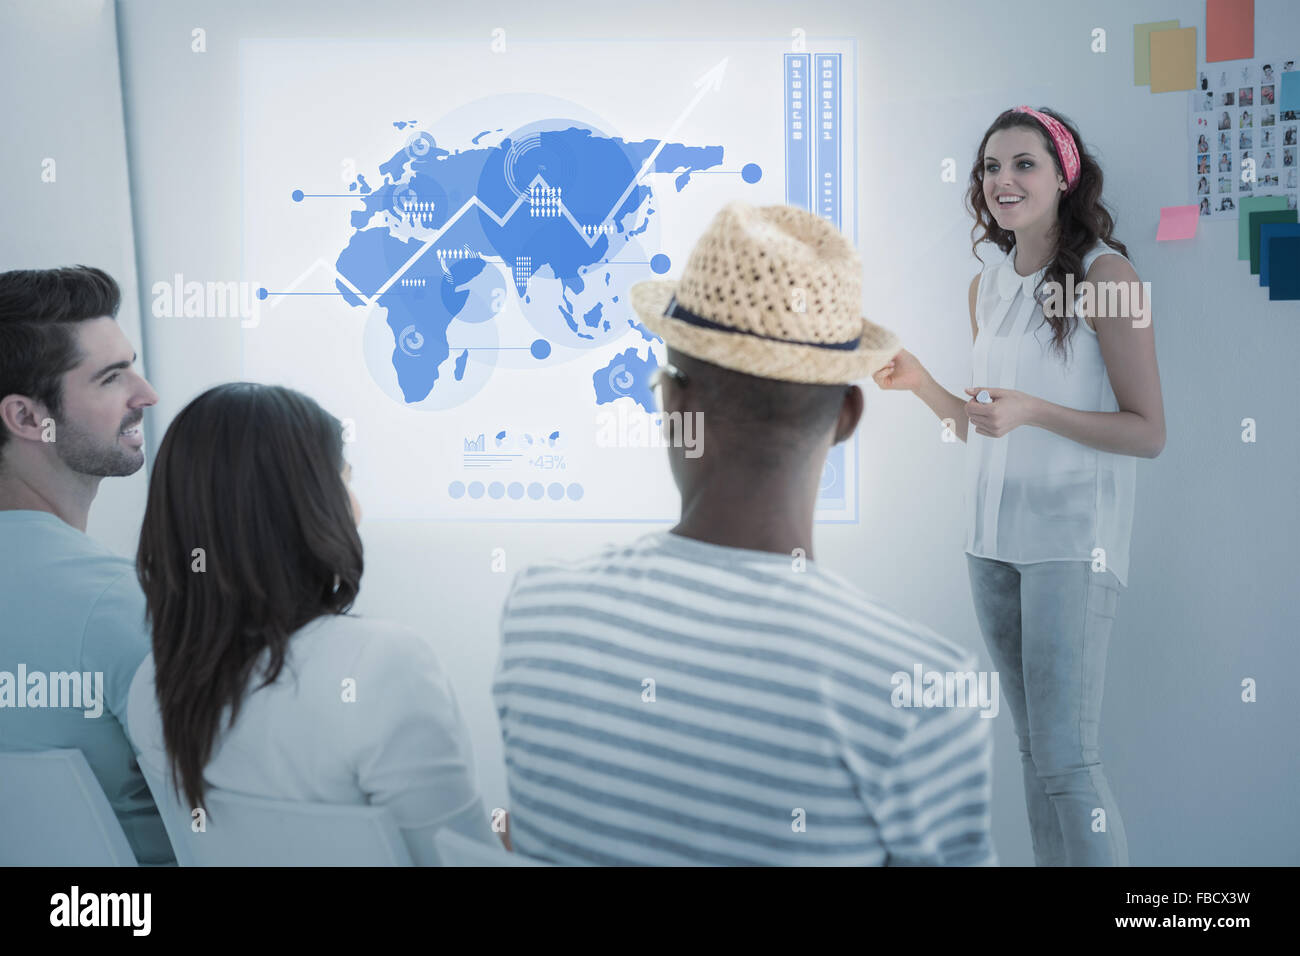 Composite image of global business interface Stock Photo